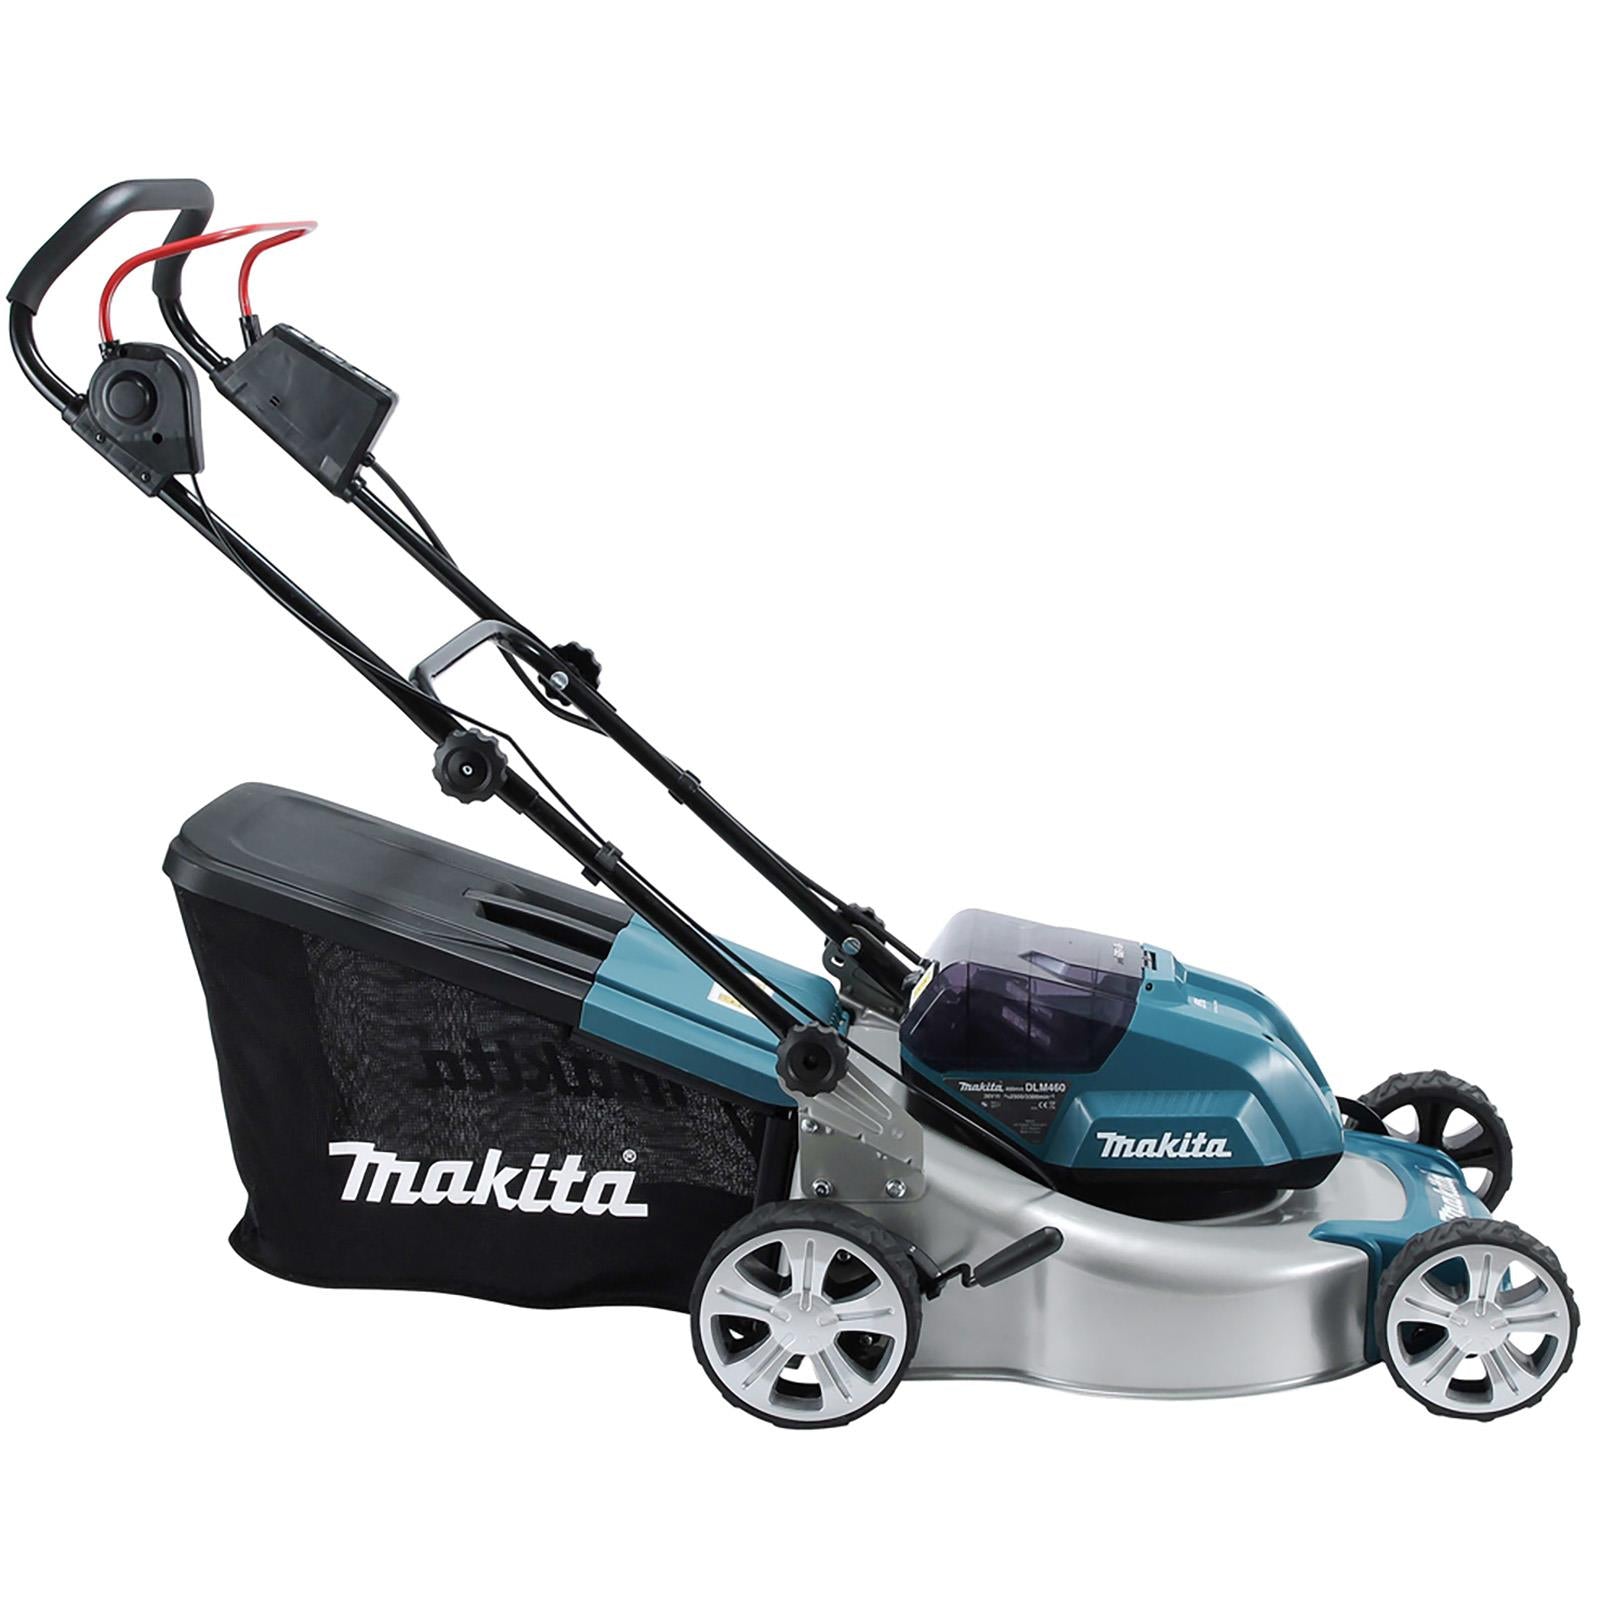 Makita 46cm Lawn Mower Kit Twin 18V LXT Li-ion Cordless Garden Grass Outdoor 2 x 6Ah Battery and Dual Rapid Charger DLM460PG2